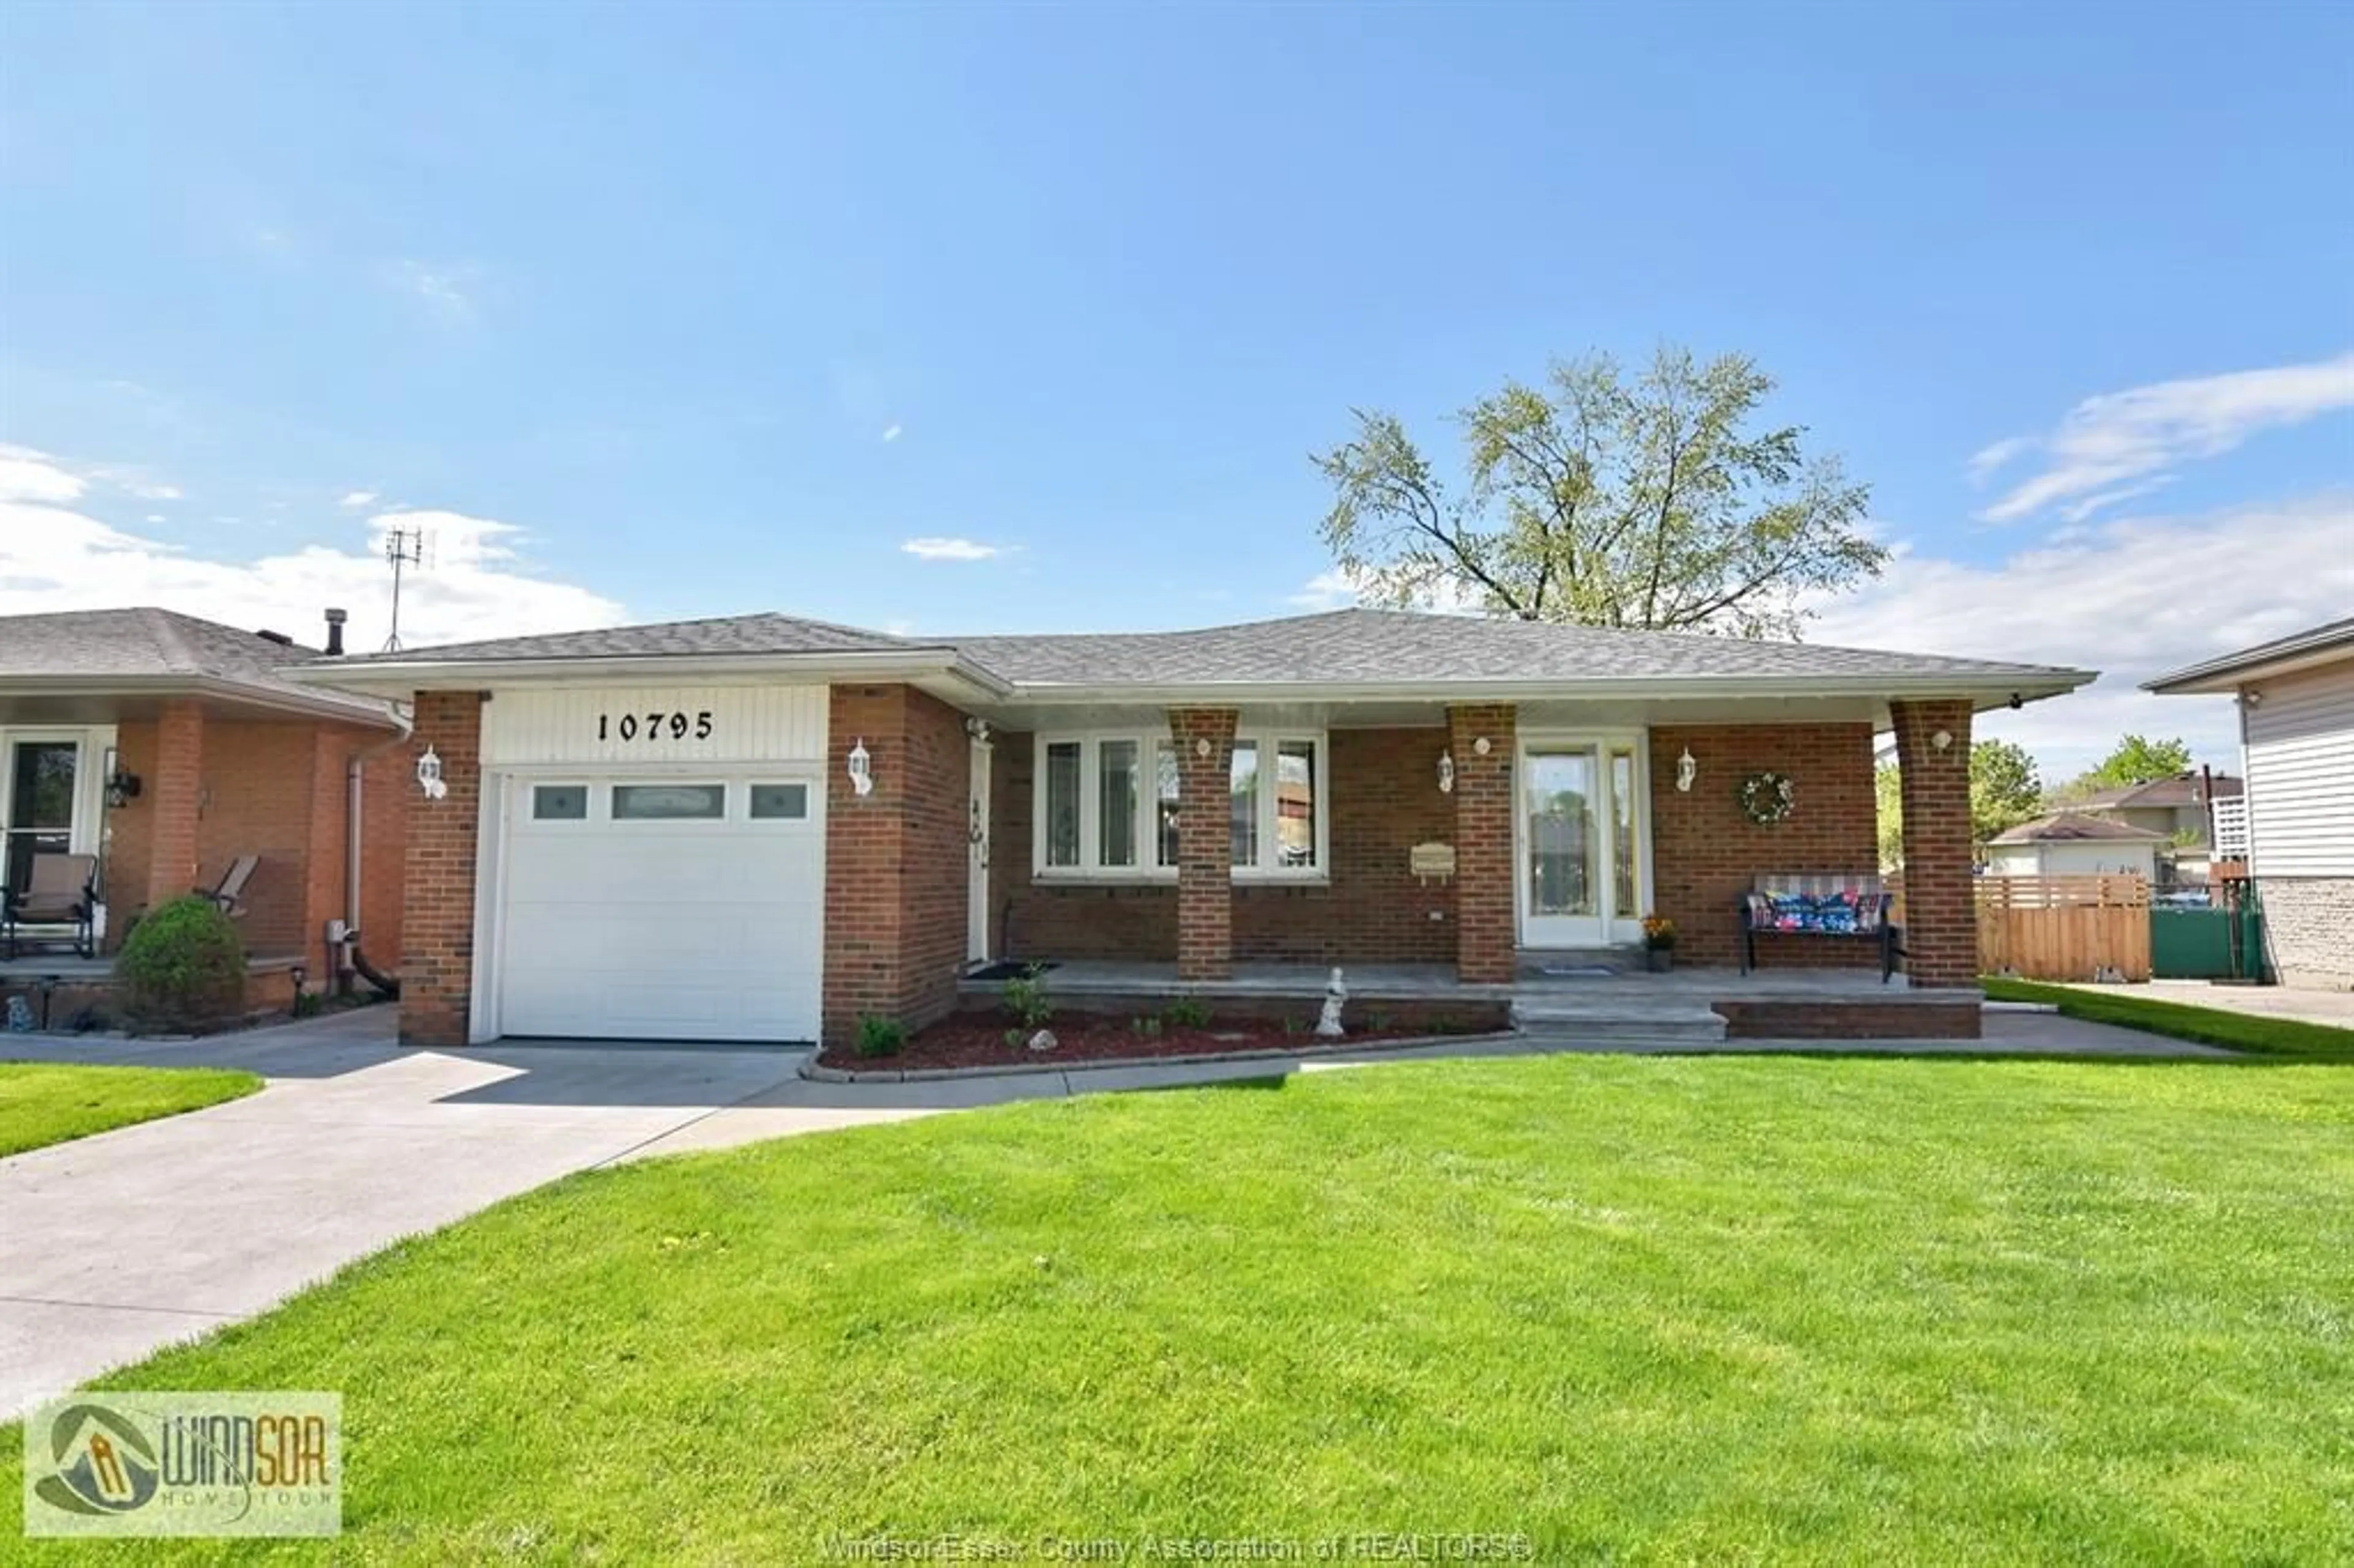 Home with brick exterior material for 10795 LAMBETH, Windsor Ontario N8R 1C8